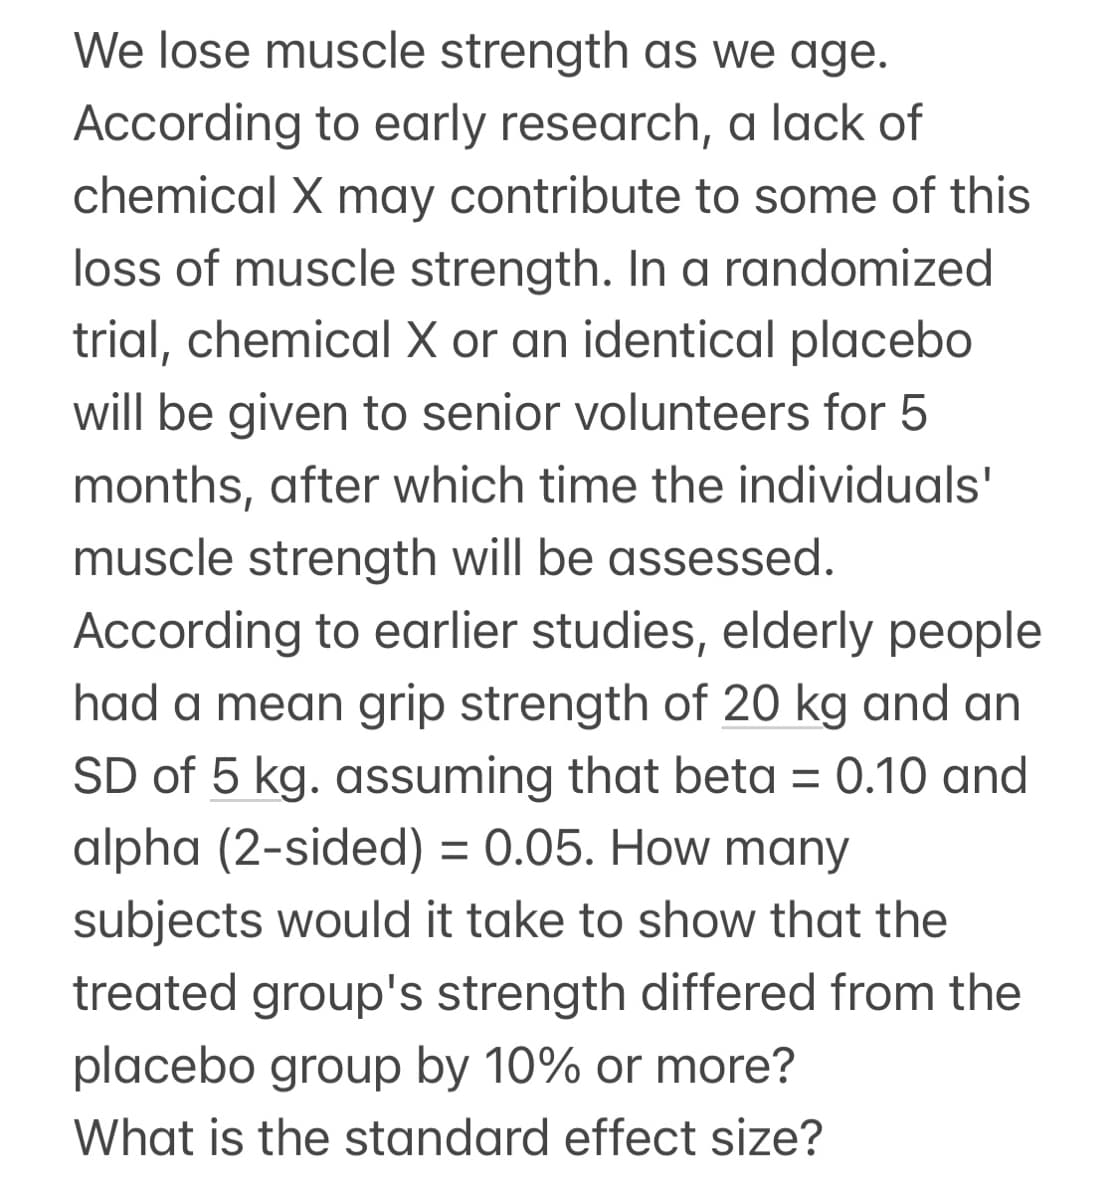 We lose muscle strength as we age.
According to early research, a lack of
chemical X may contribute to some of this
loss of muscle strength. In a randomized
trial, chemical X or an identical placebo
will be given to senior volunteers for 5
months, after which time the individuals'
muscle strength will be assessed.
According to earlier studies, elderly people
had a mean grip strength of 20 kg and an
SD of 5 kg. assuming that beta = 0.10 and
alpha (2-sided) = 0.05. How many
subjects would it take to show that the
treated group's strength differed from the
placebo group by 10% or more?
What is the standard effect size?